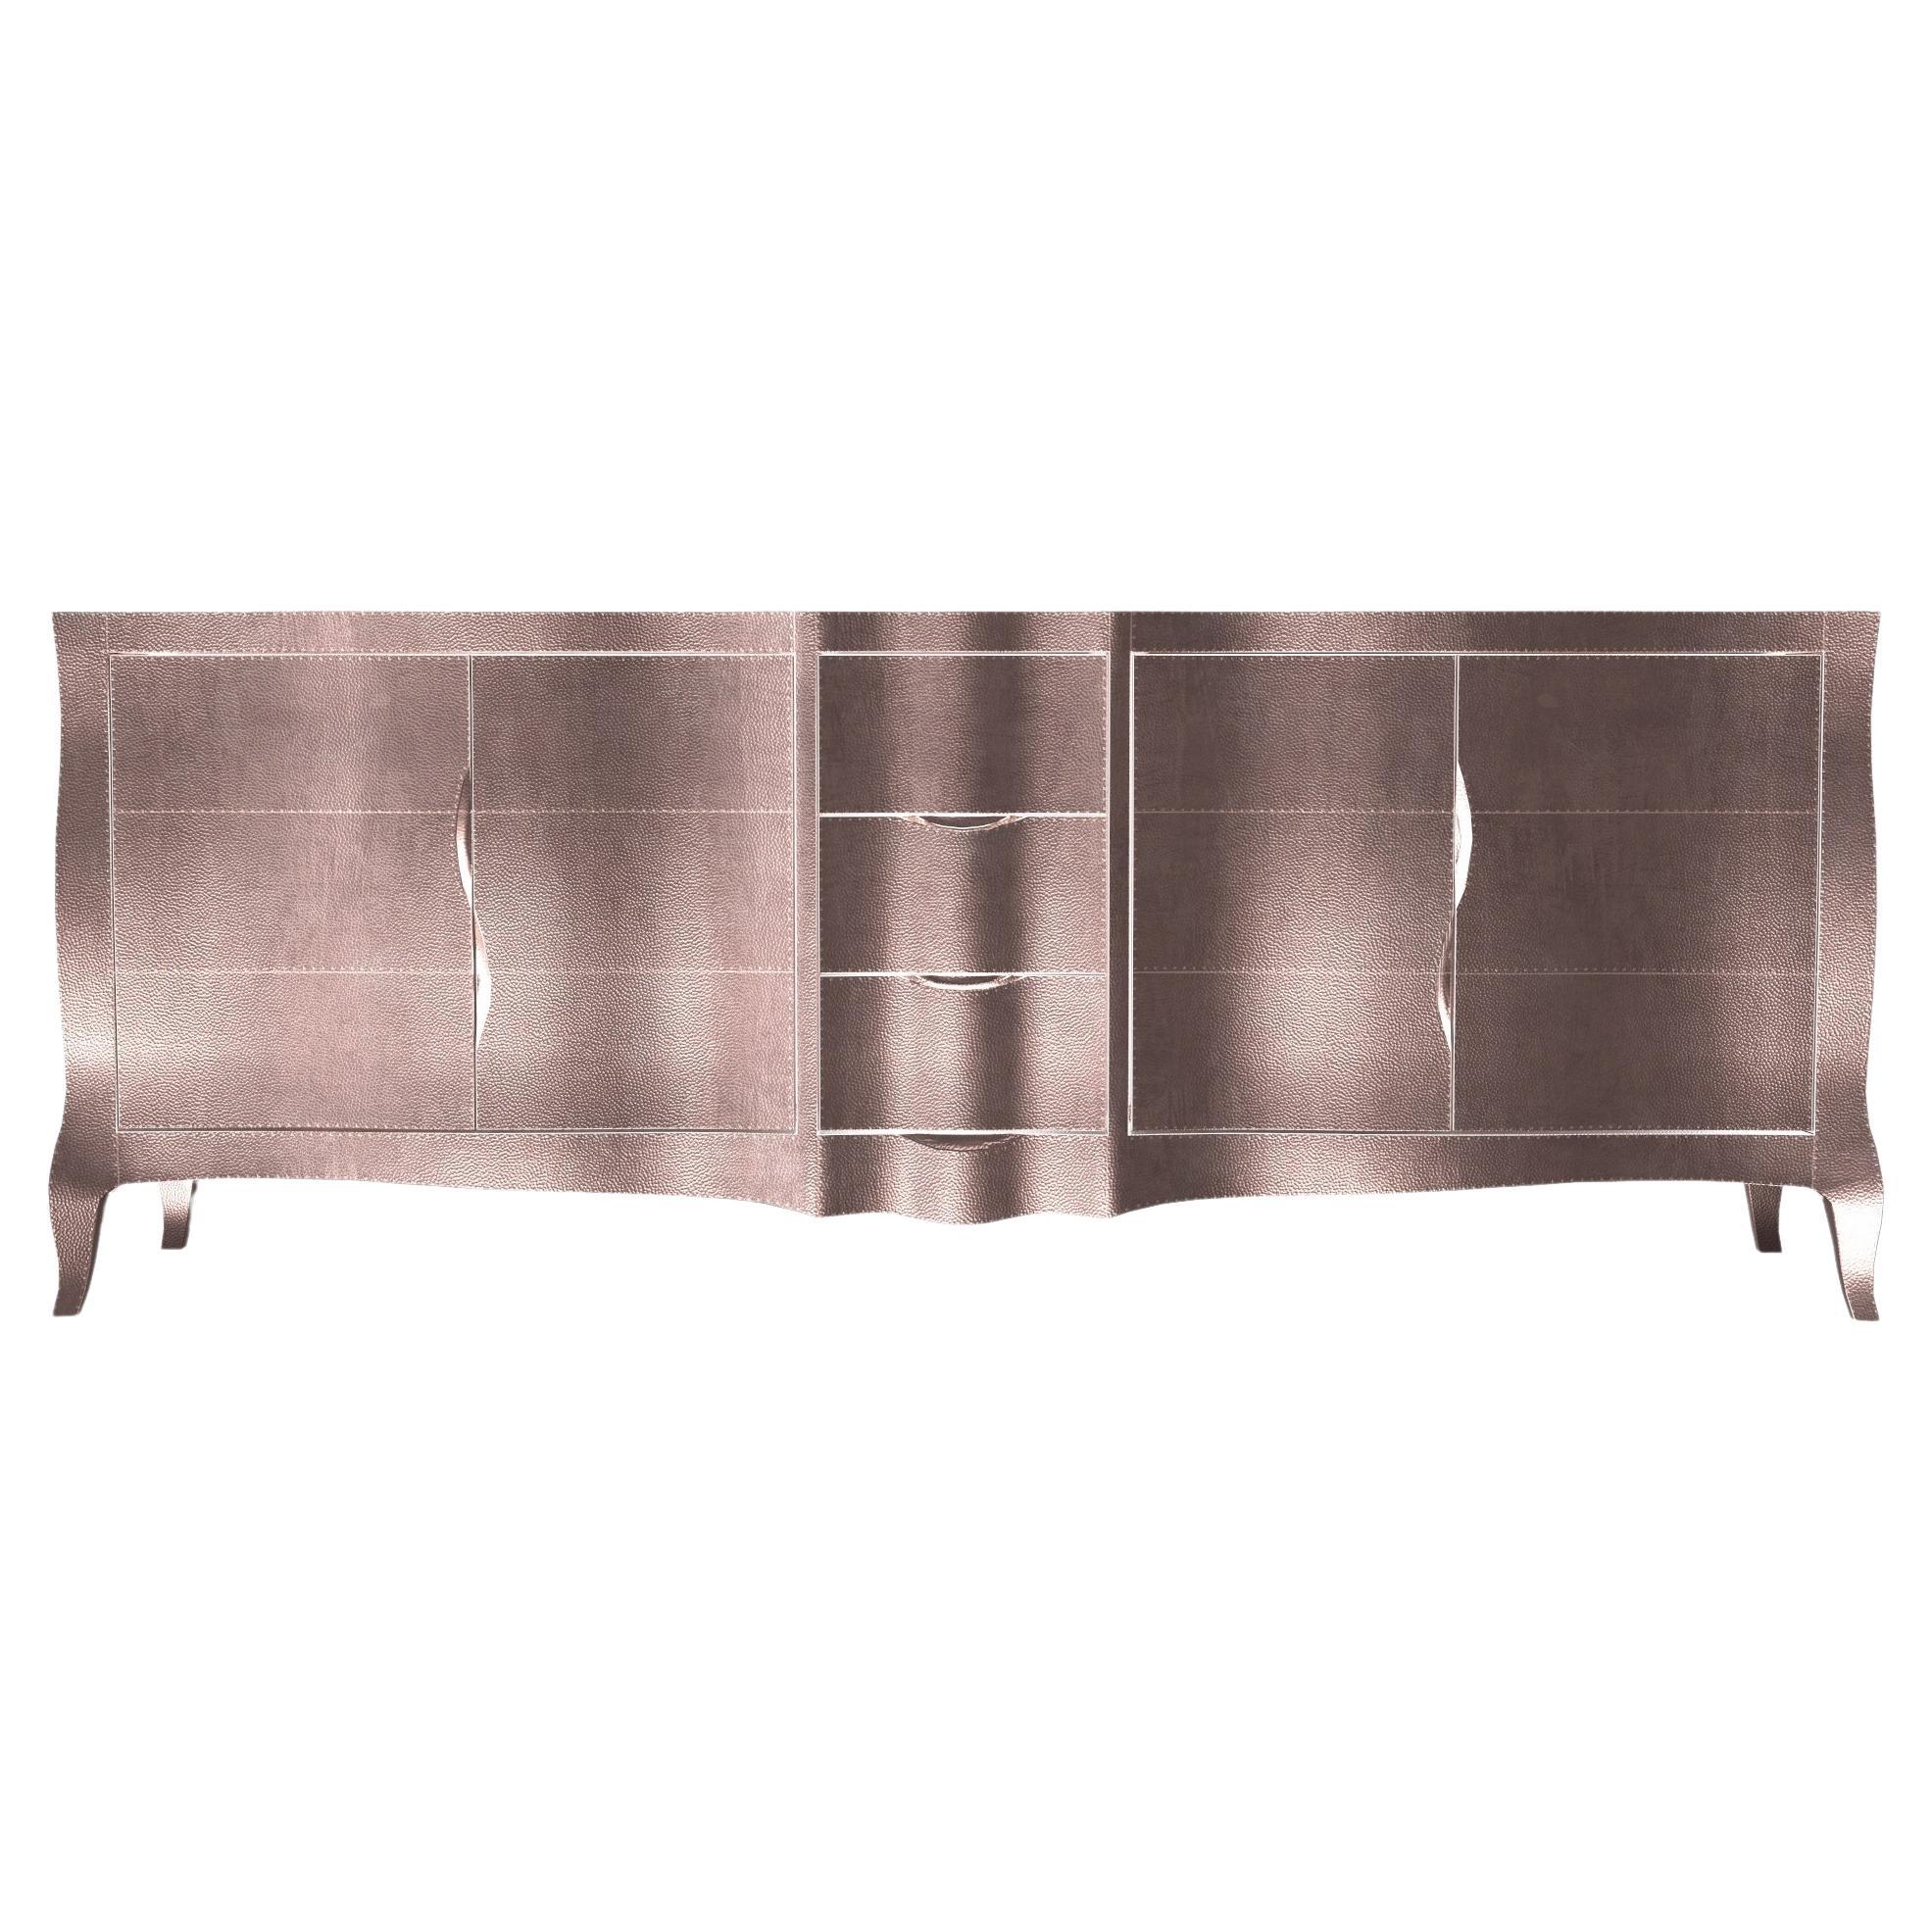 Louise Credenza Art Deco Dressers in Mid. Hammered Copper by Paul Mathieu For Sale